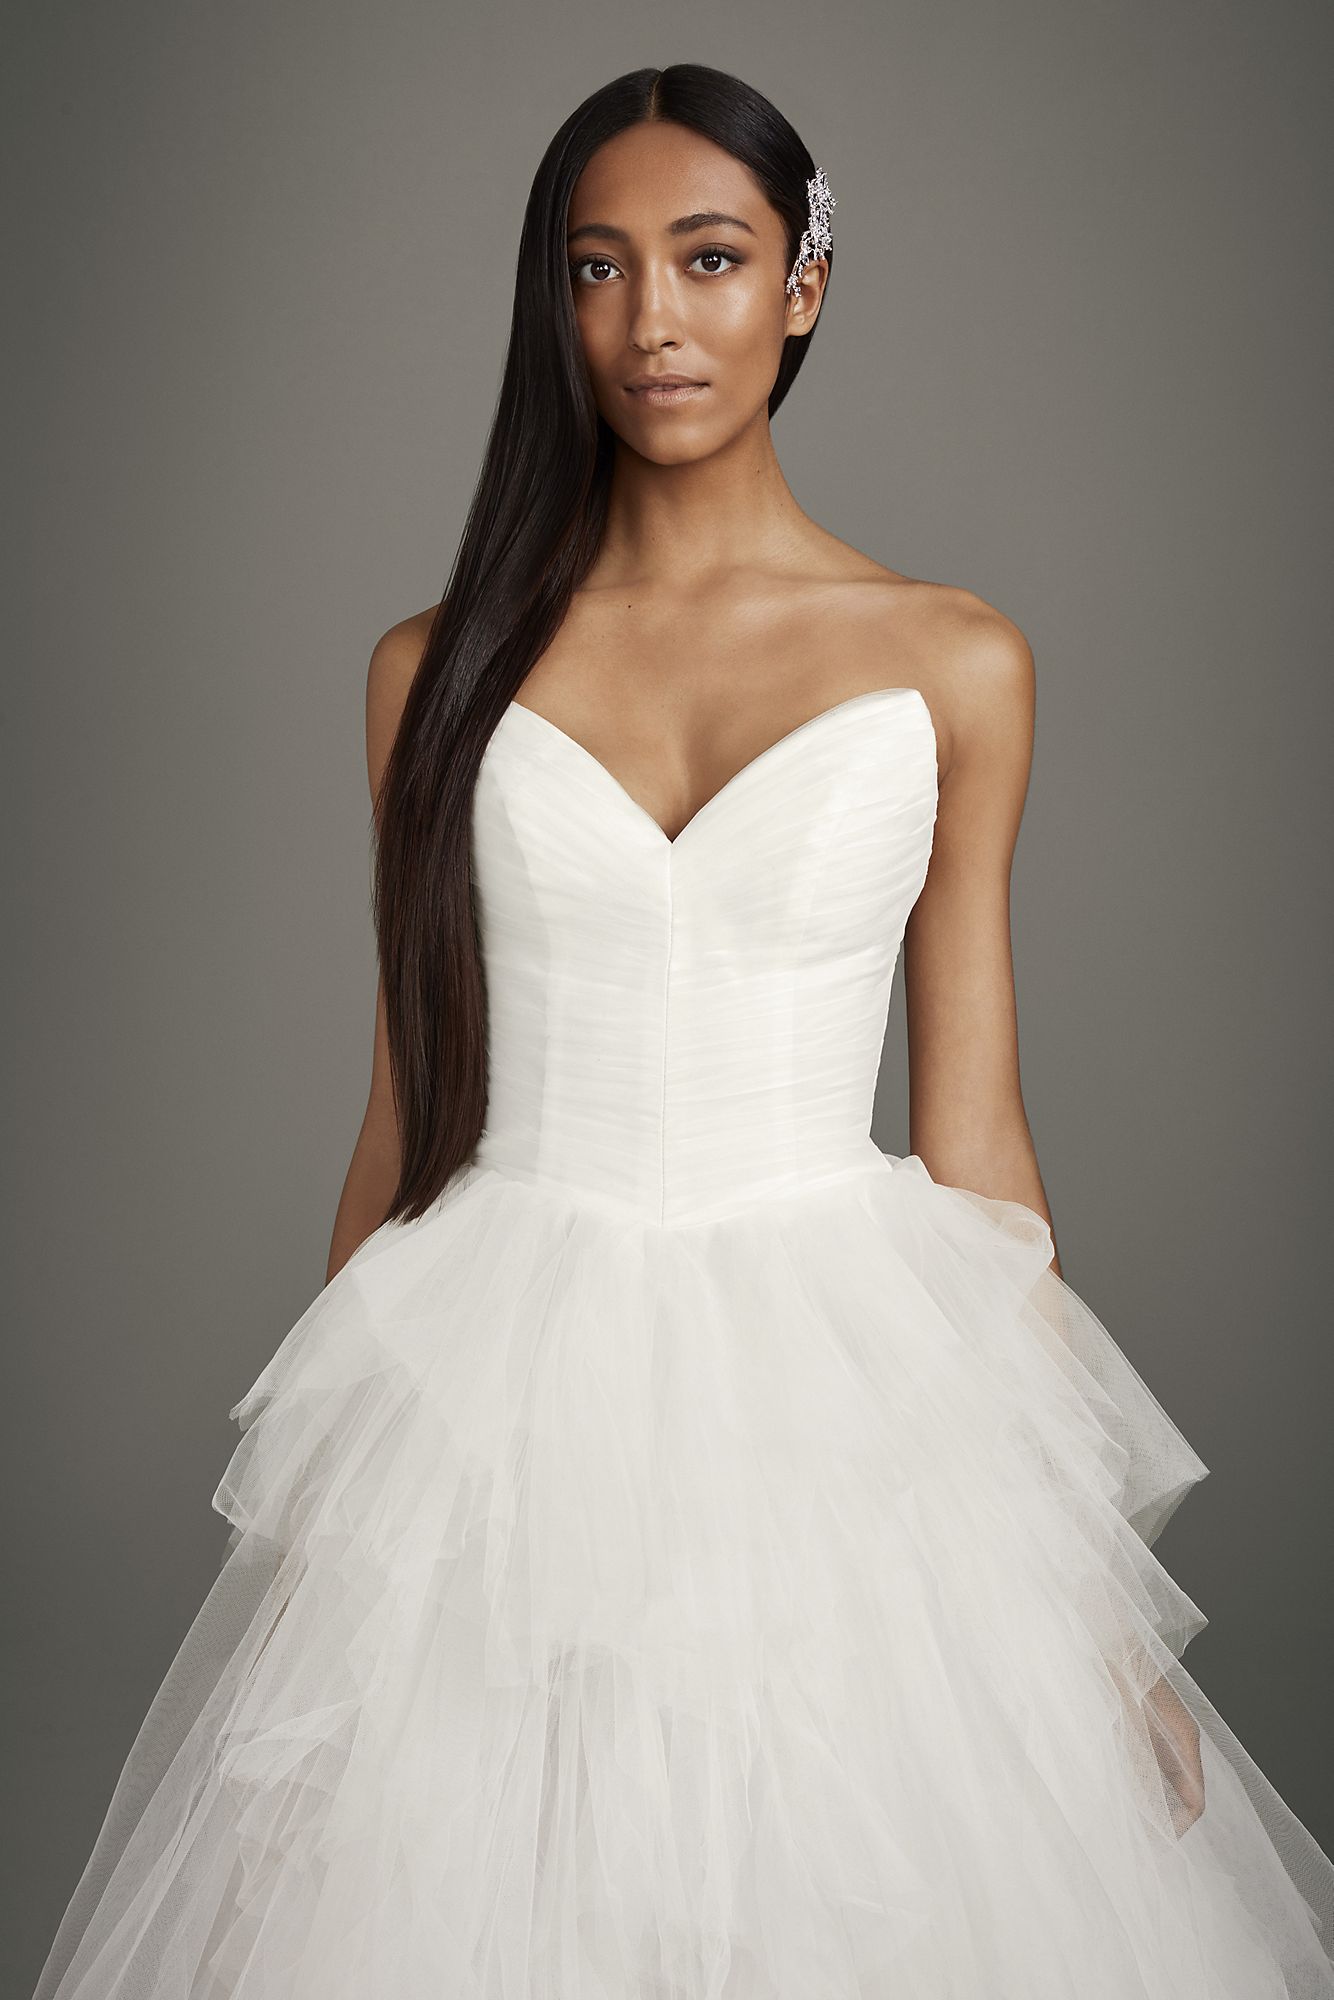 Peaked Sweetheart Tulle Ball Gown Wedding Dress VW351485